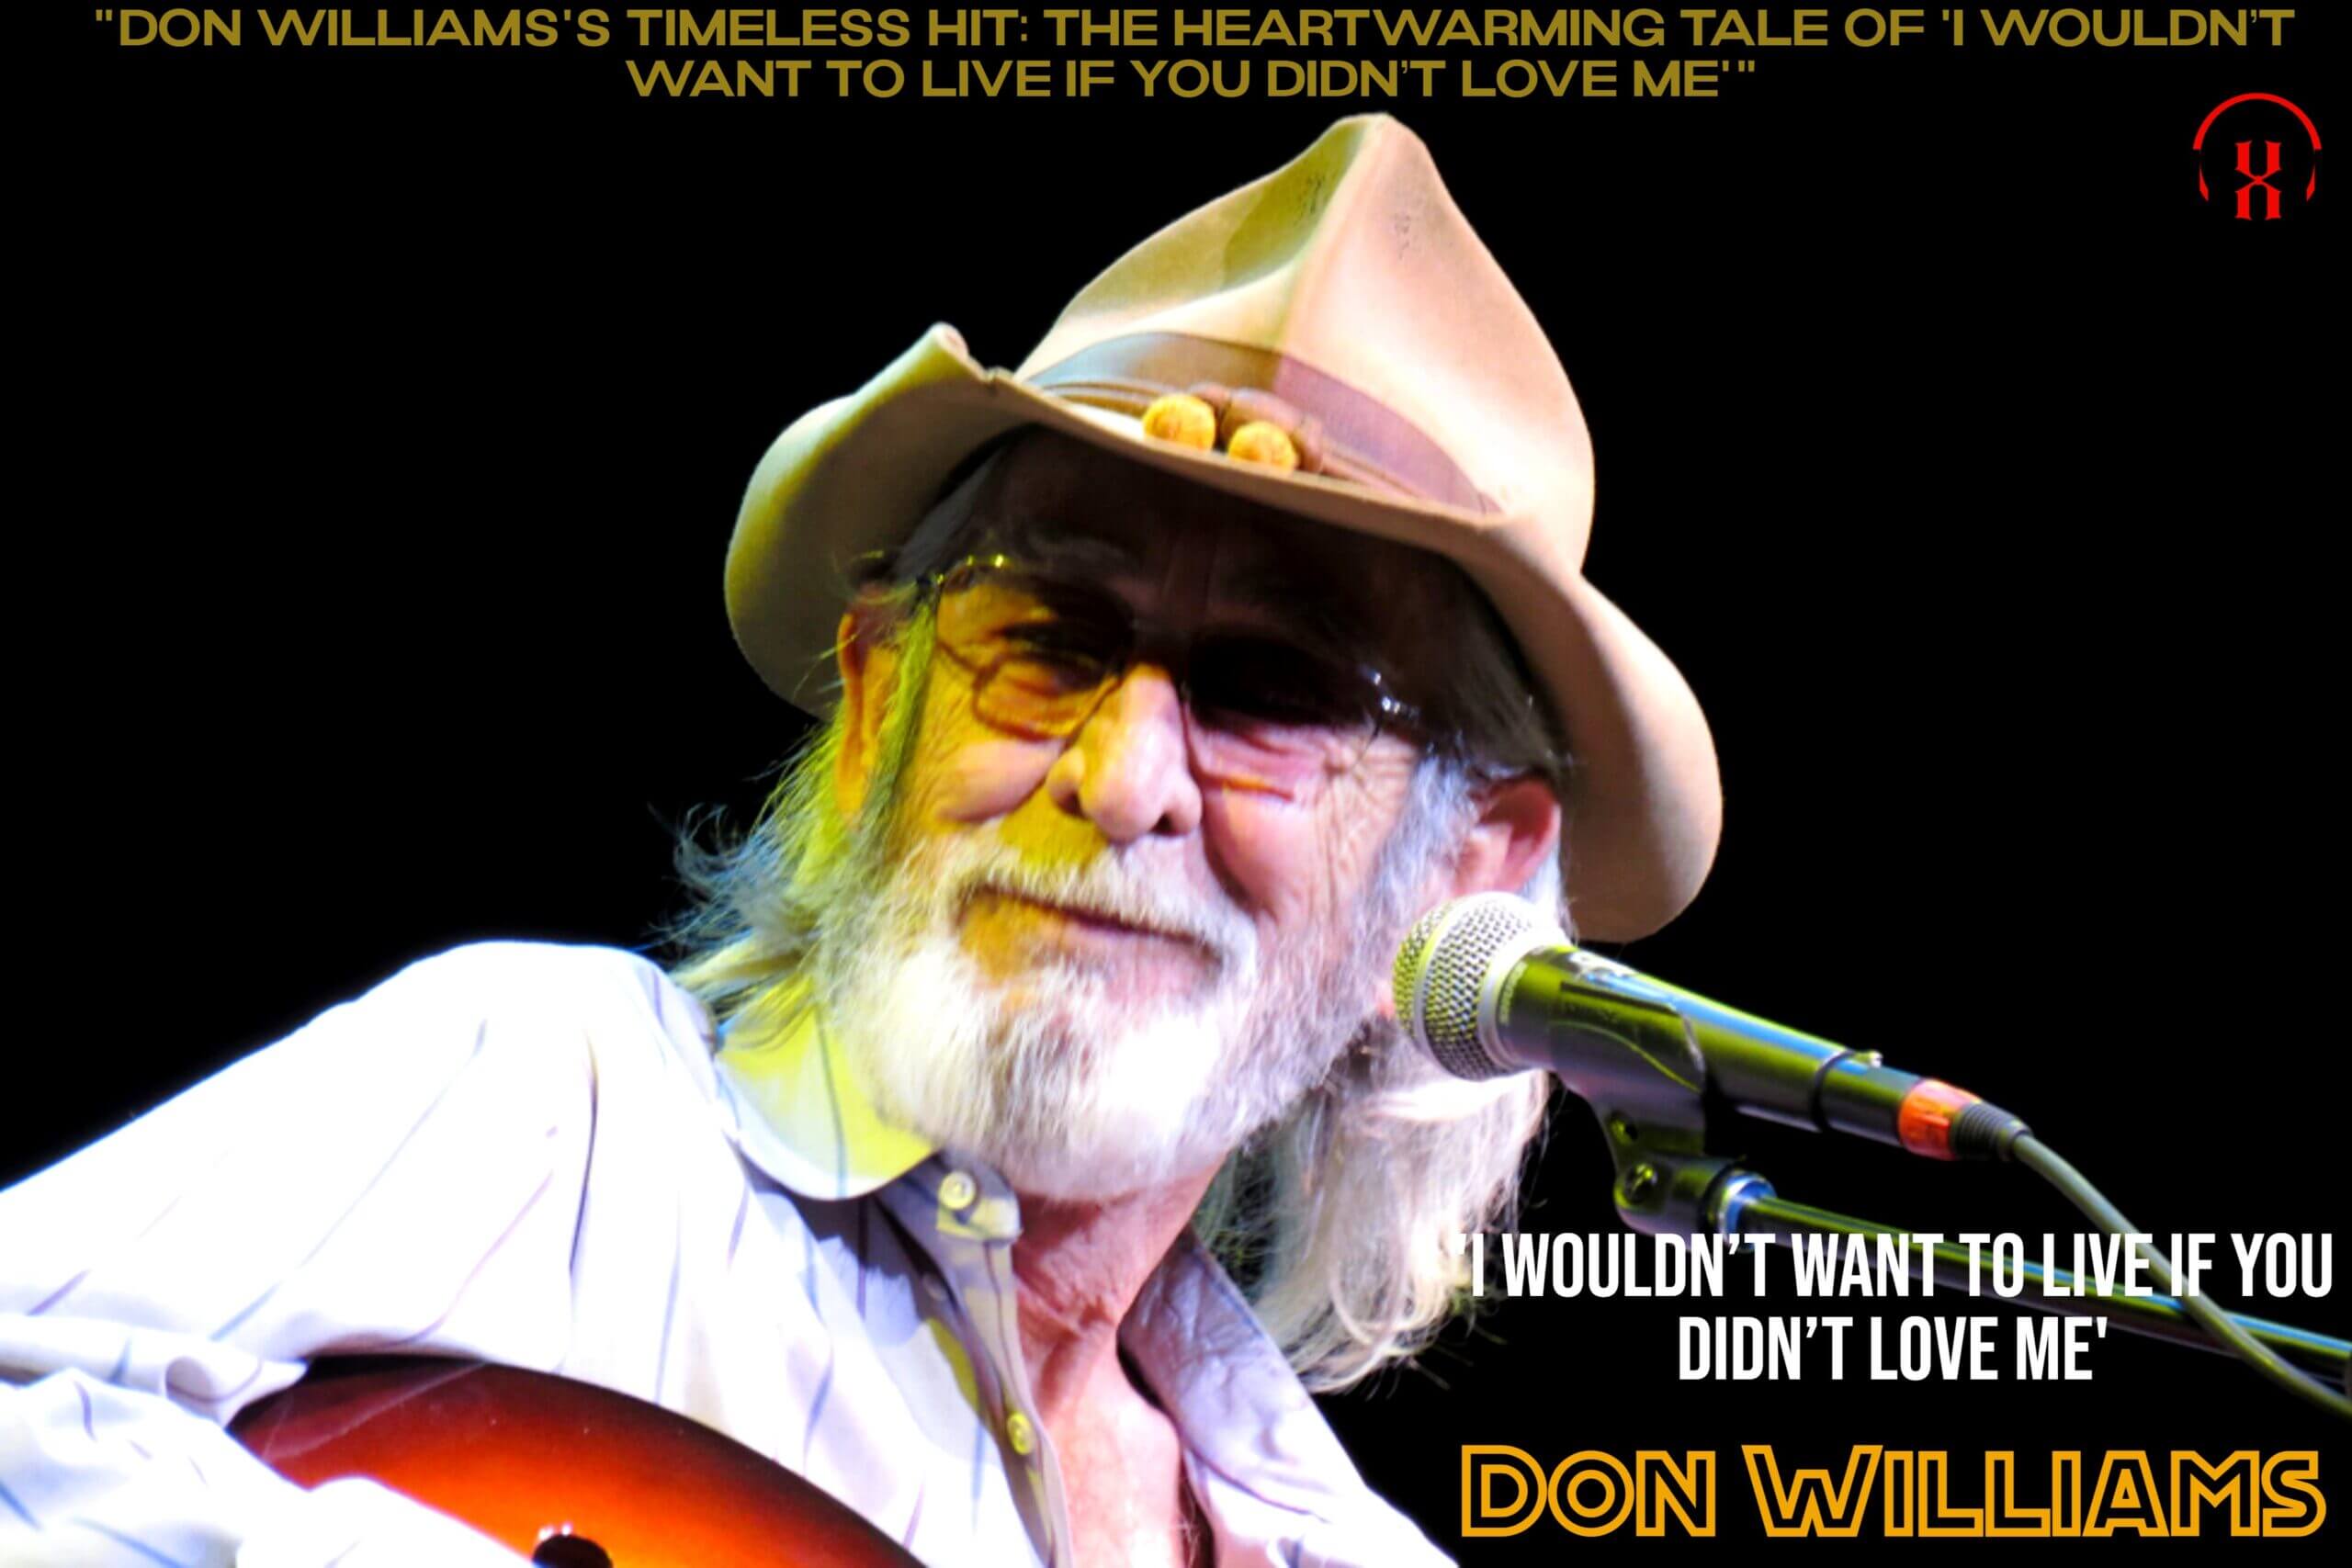 "Don Williams's Timeless Hit: The Heartwarming Tale of 'I Wouldn’t Want To Live If You Didn’t Love Me'"